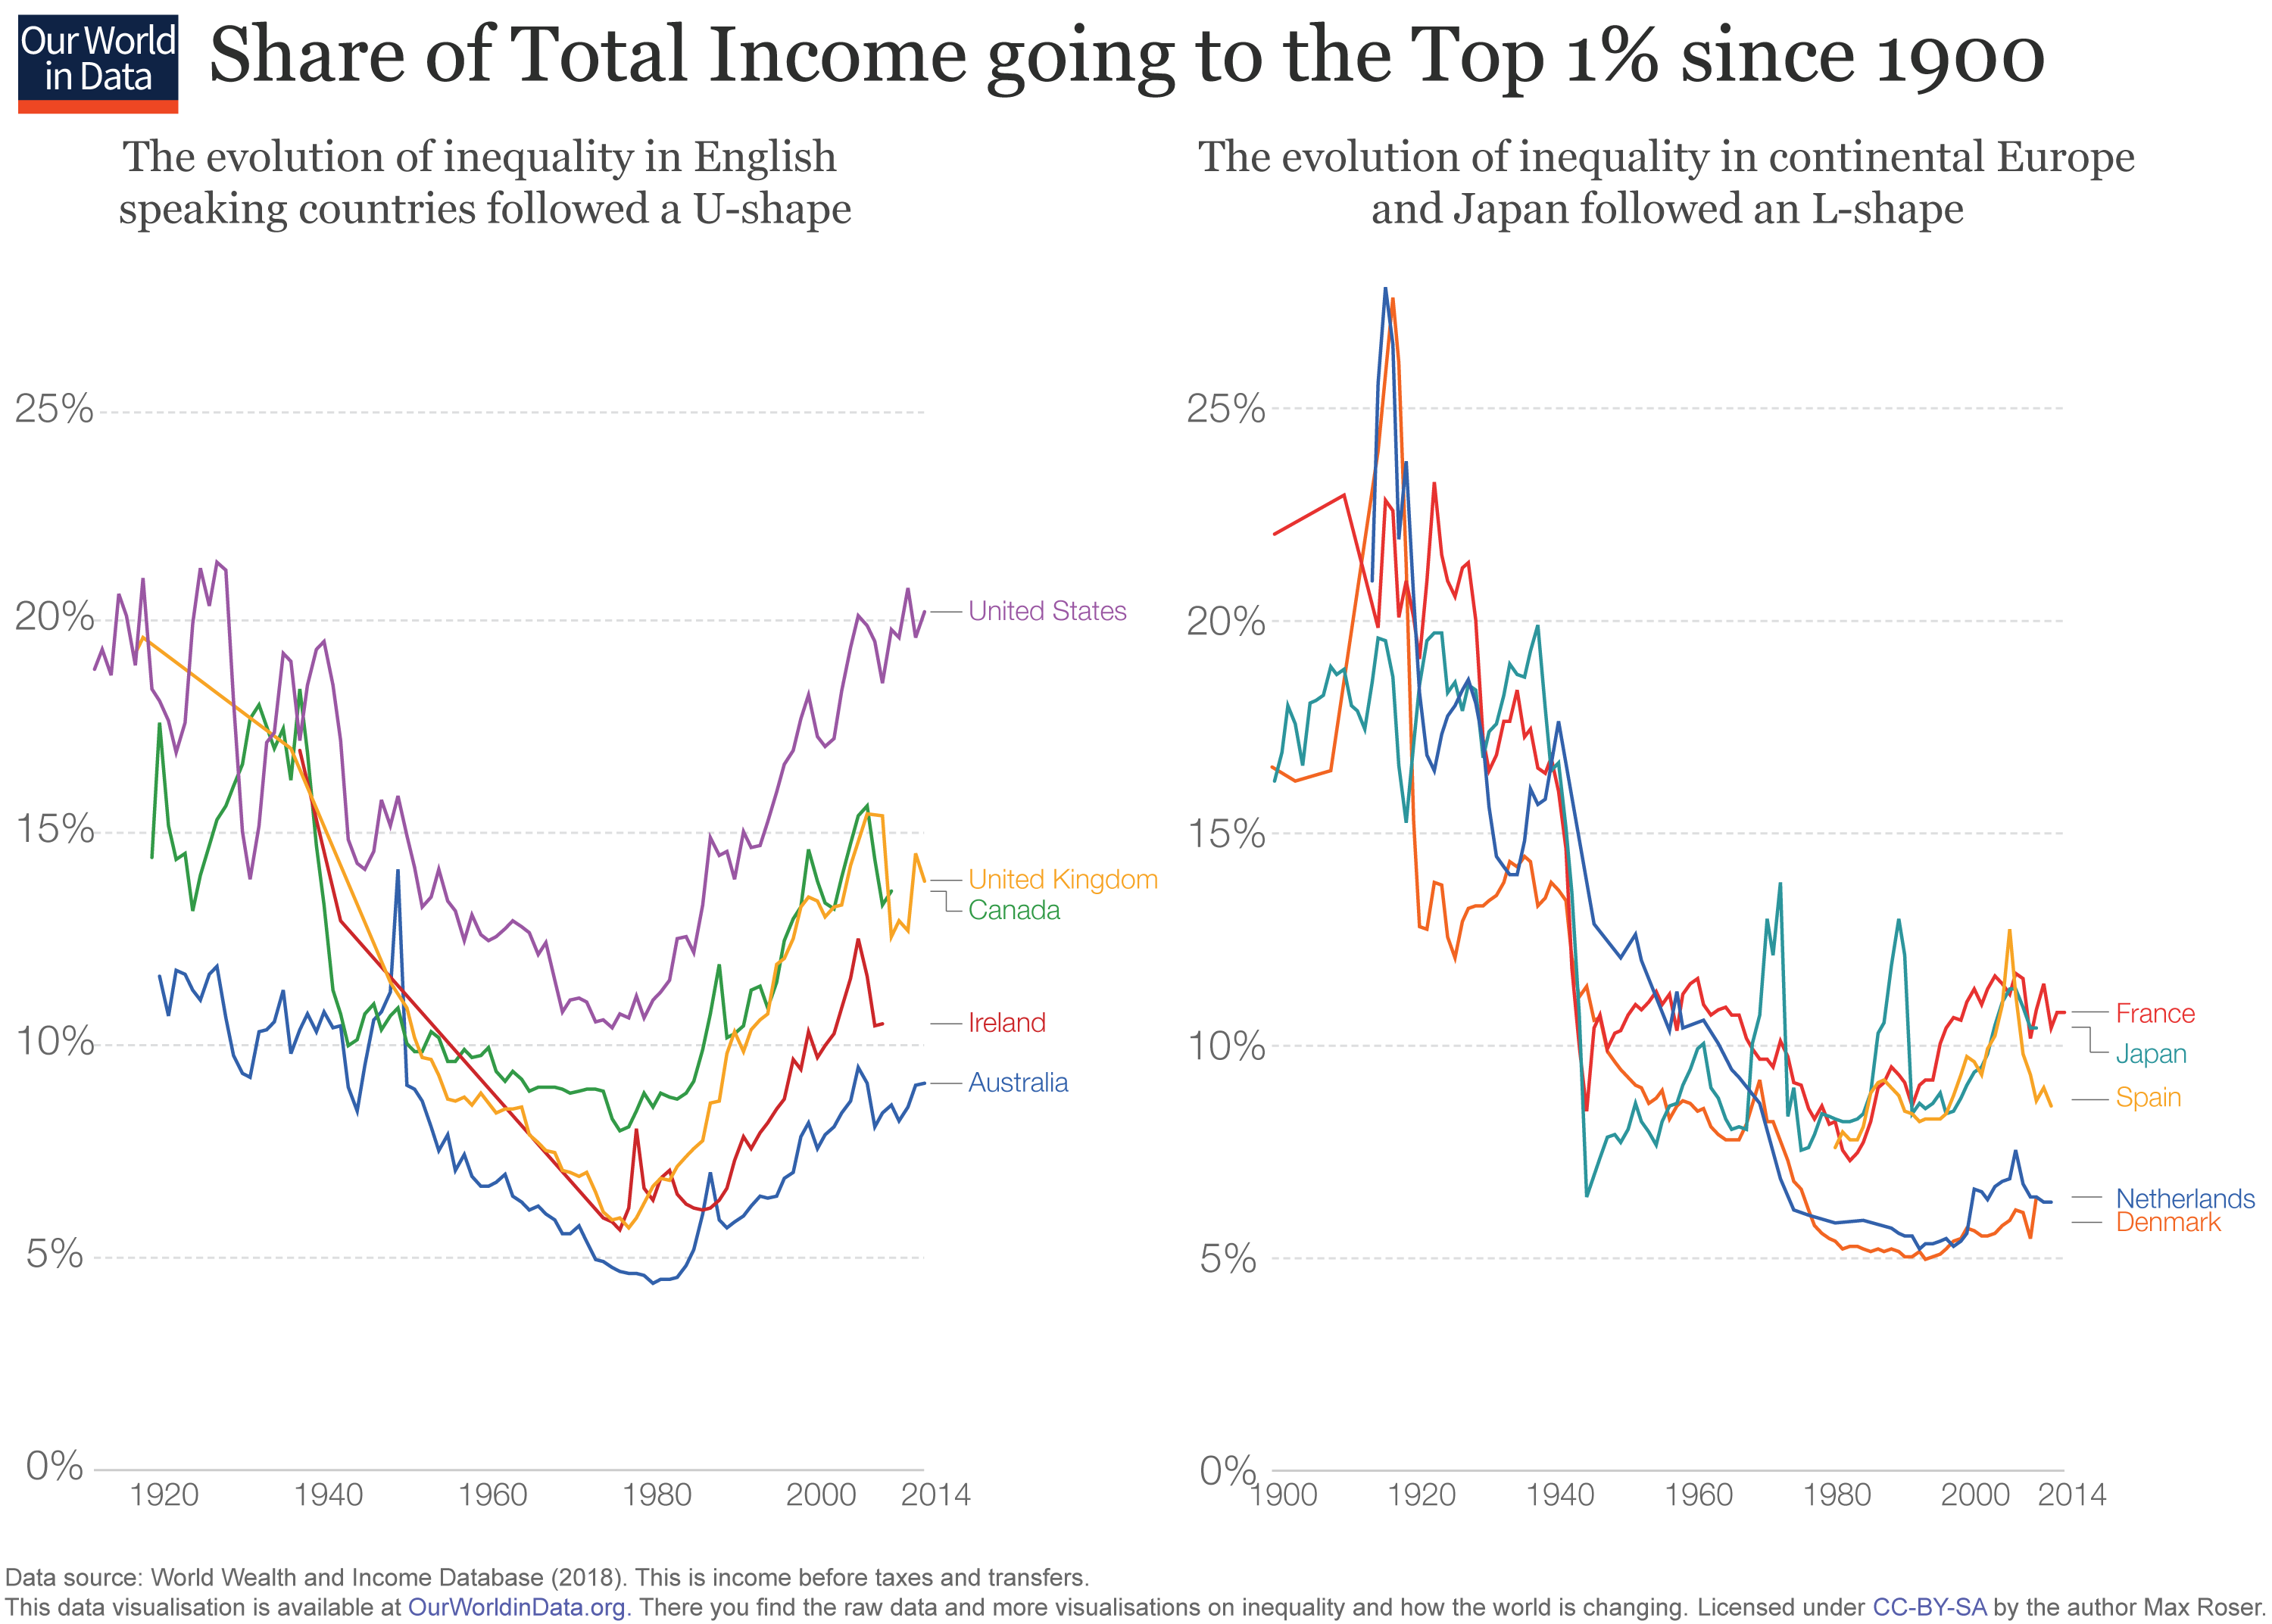 Graph showing the share of income of the top 1% in various countires